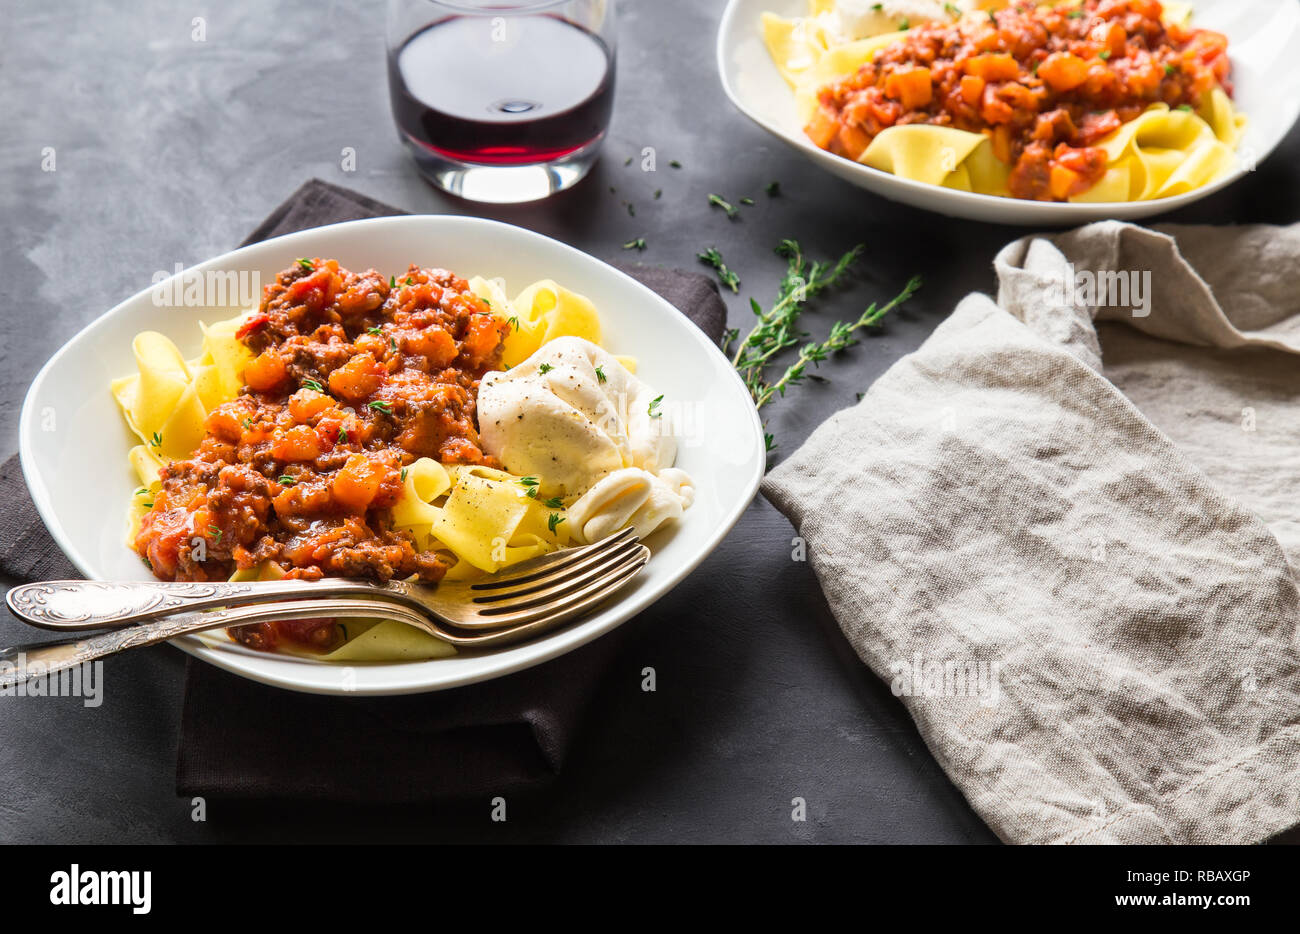 Pappardelle pasta with meat ragout with pumpkin and burrata cheese on gray concrete background. Italian cuisine. Stock Photo